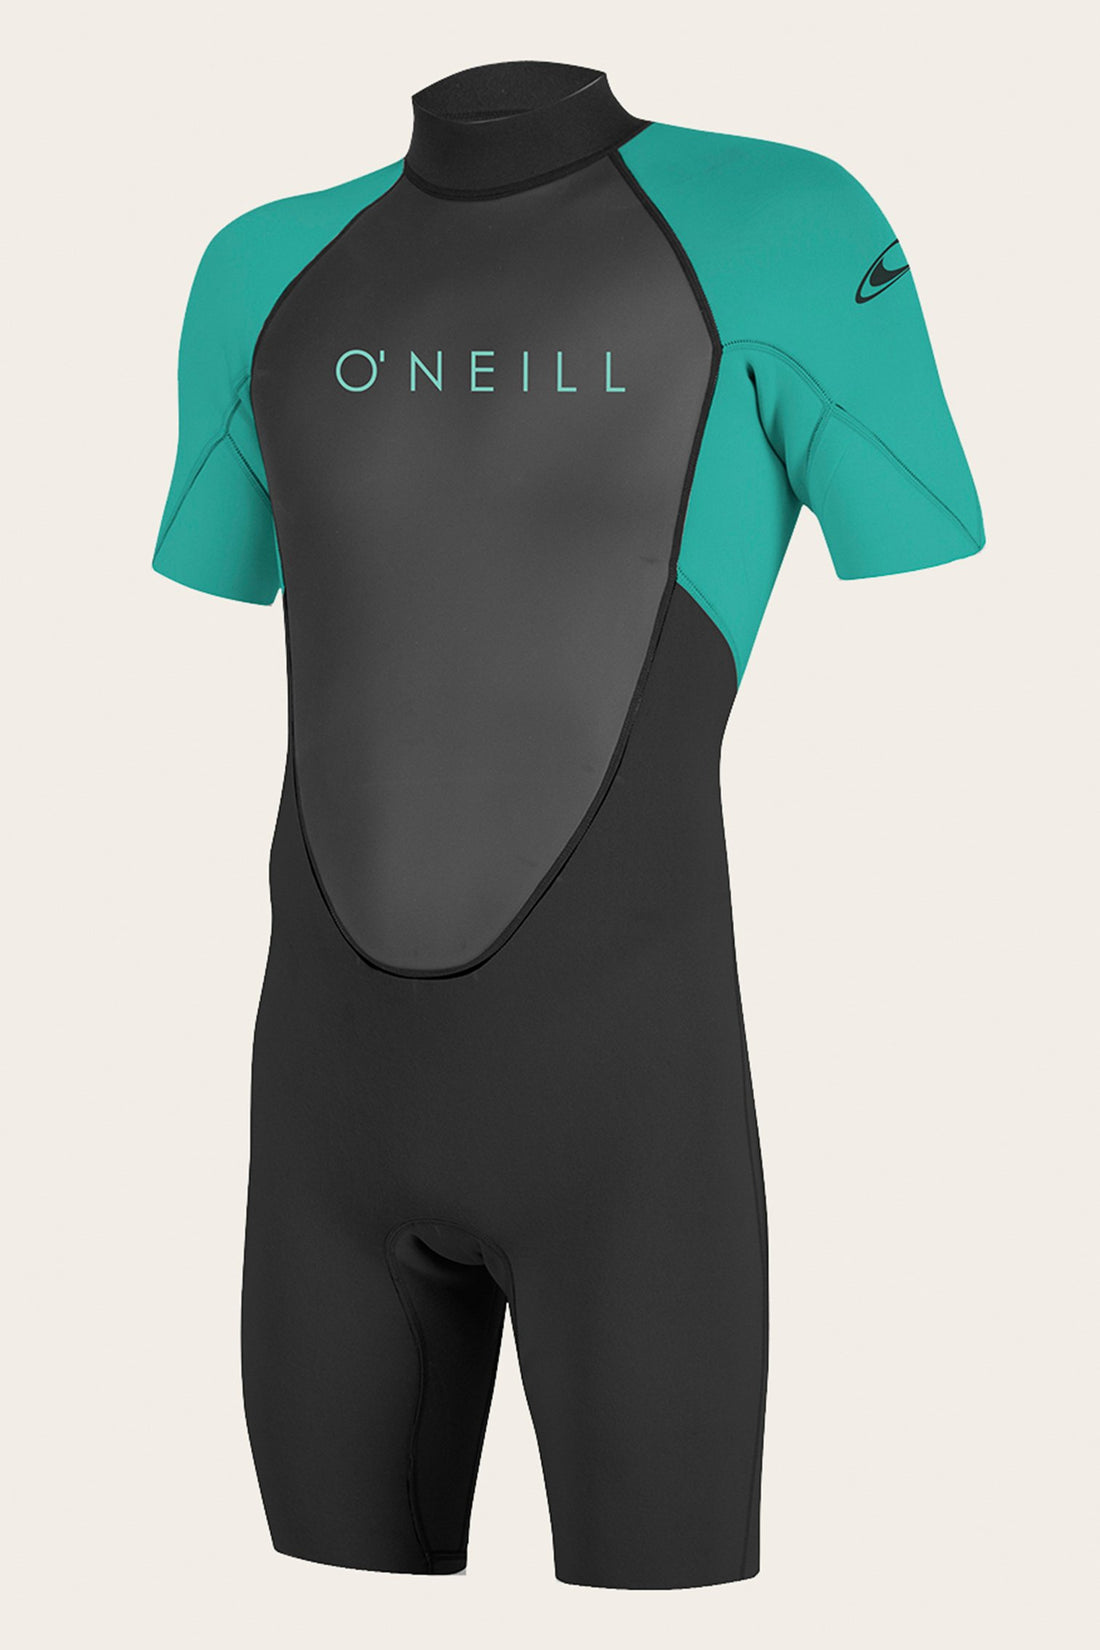 Wetsuit - Youth O'Neill  Reactor 2mm Spring Wetsuit